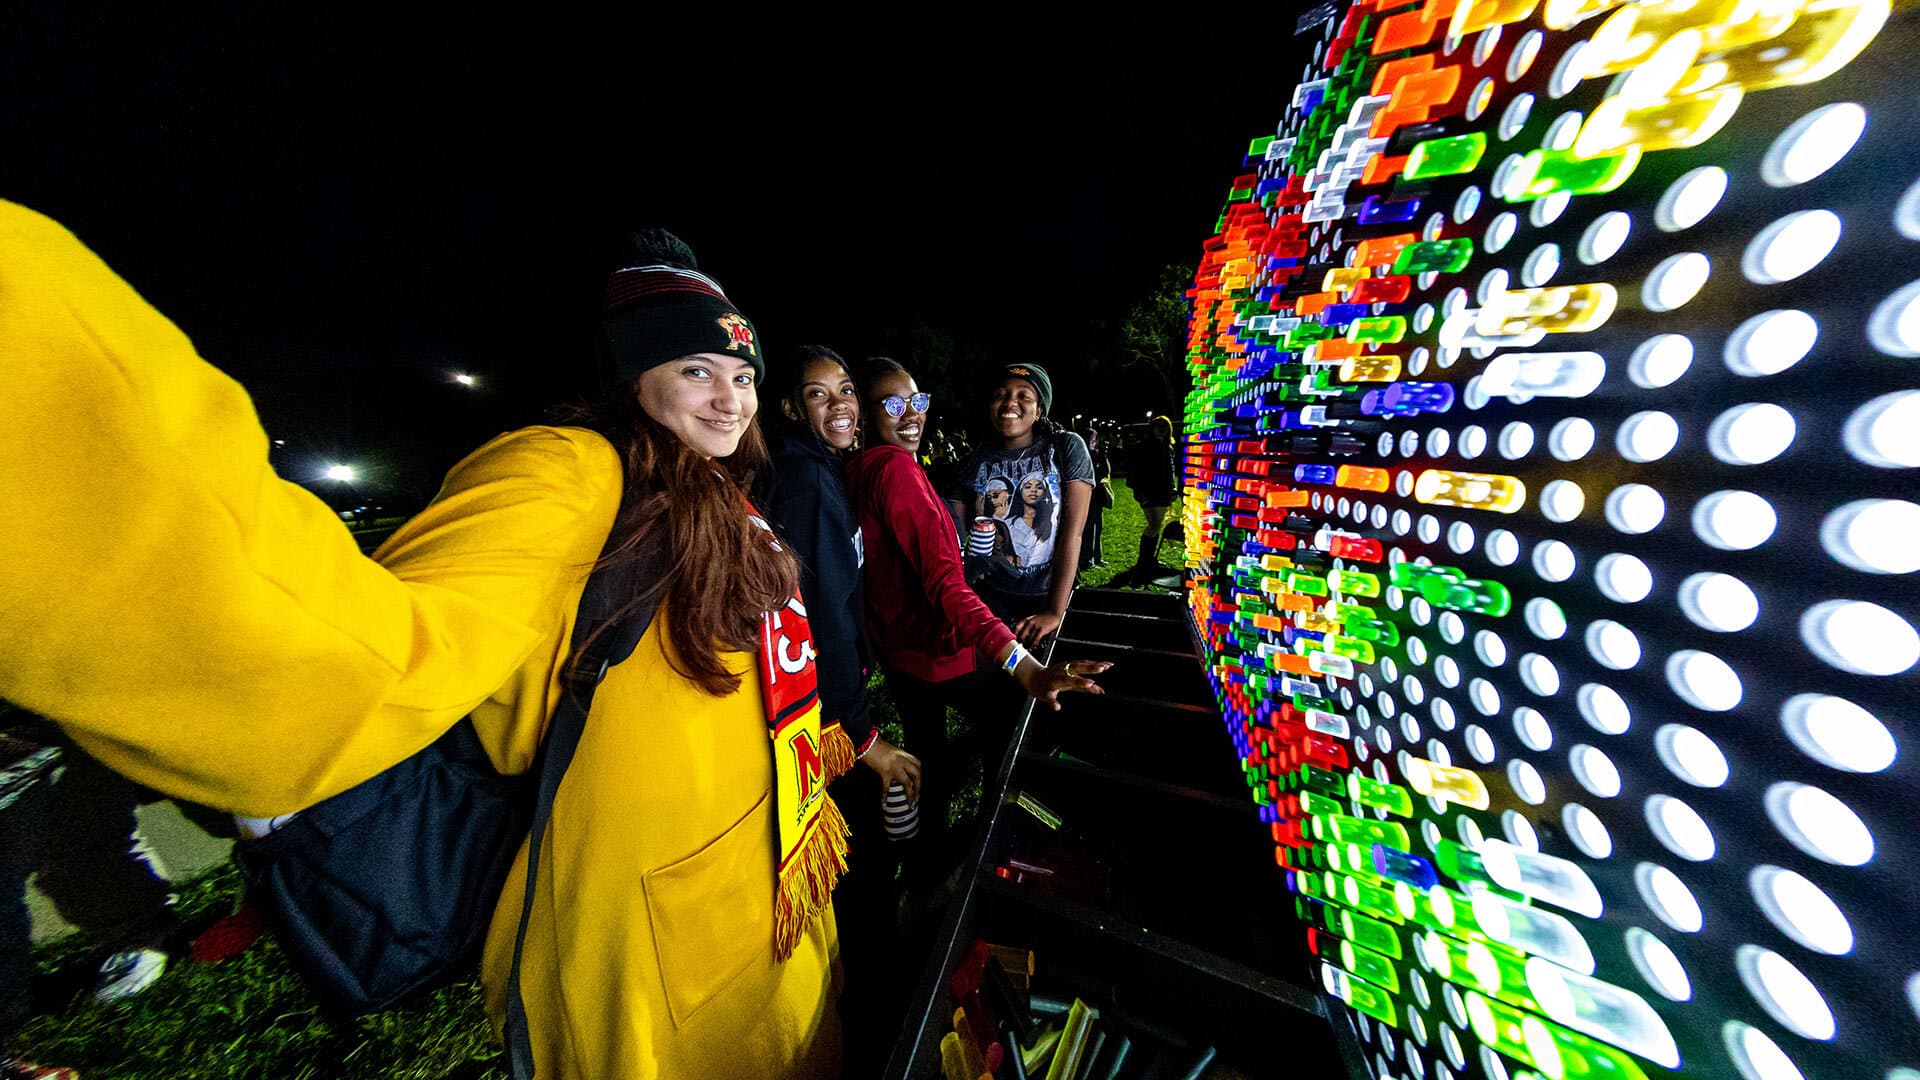 people play with a giant lite-brite toy